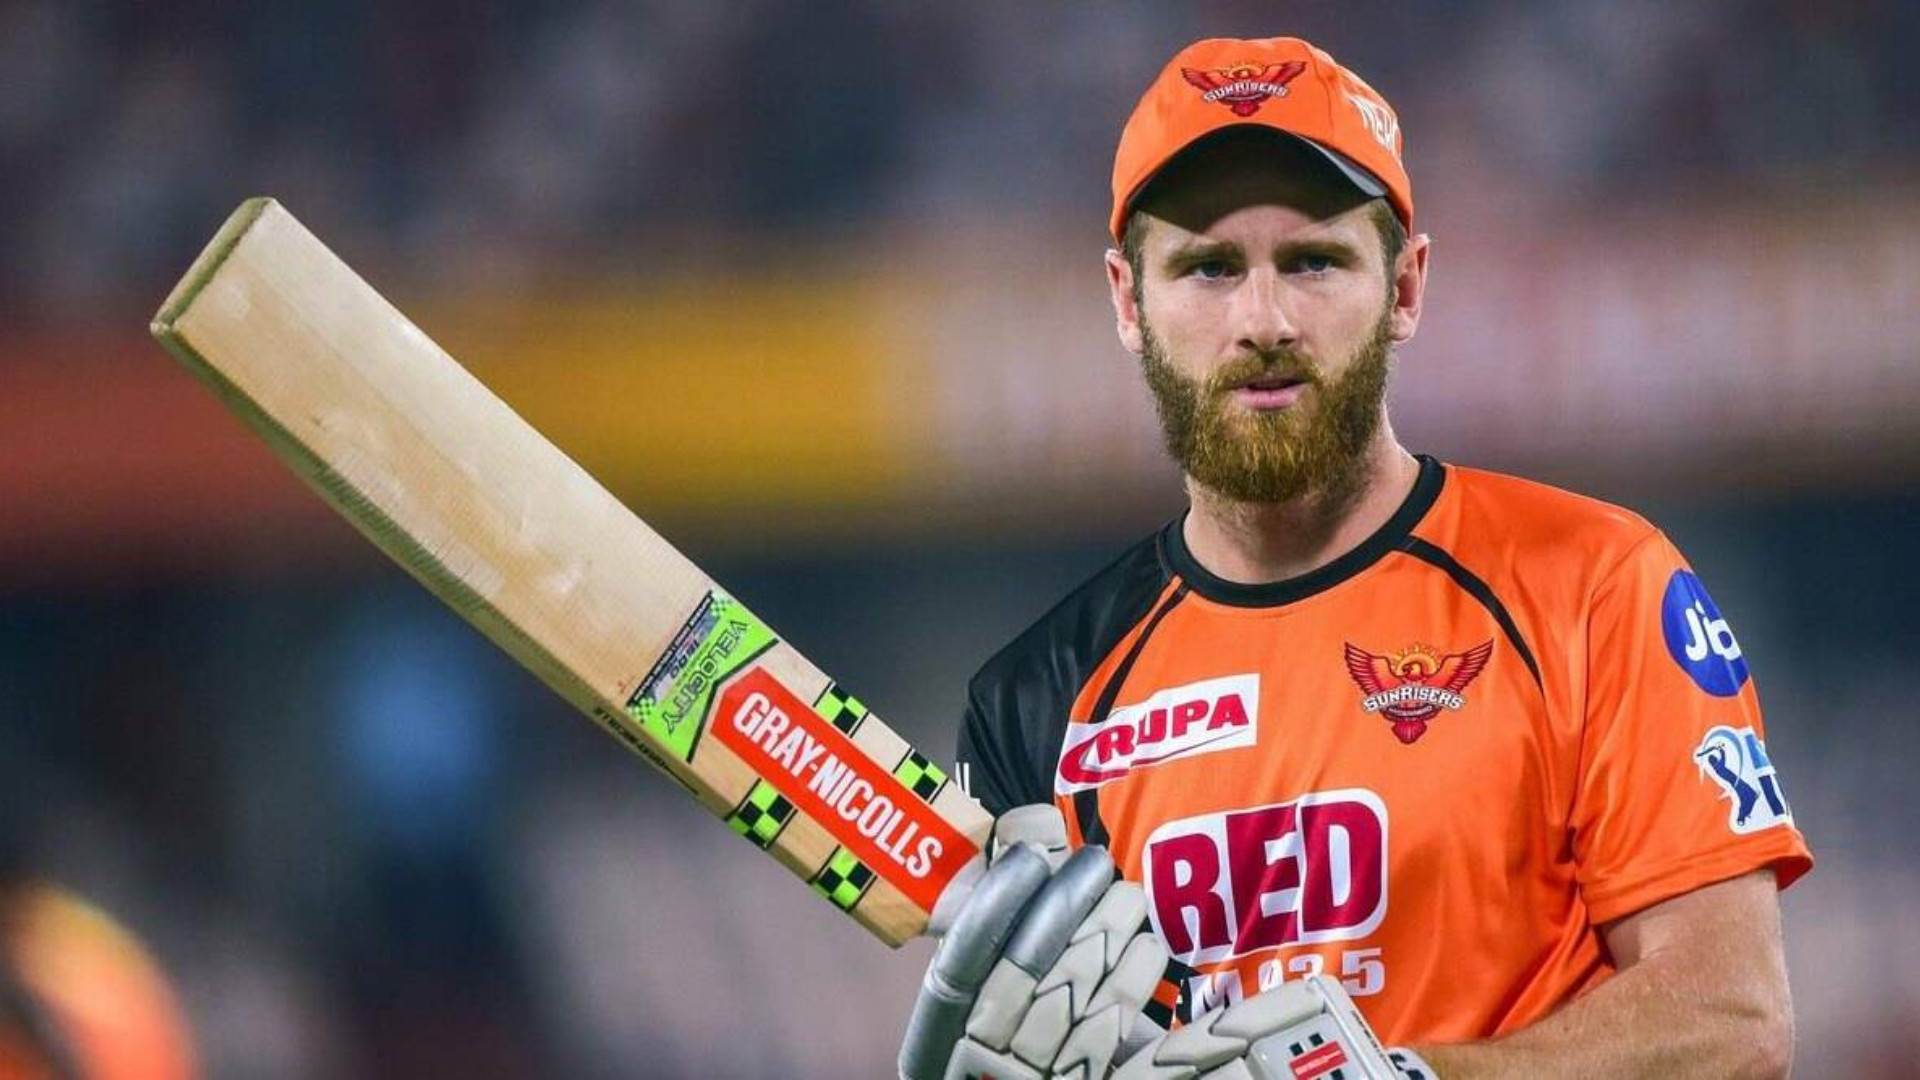 Kane Williamson in a file photo. (Image credit: Twitter)